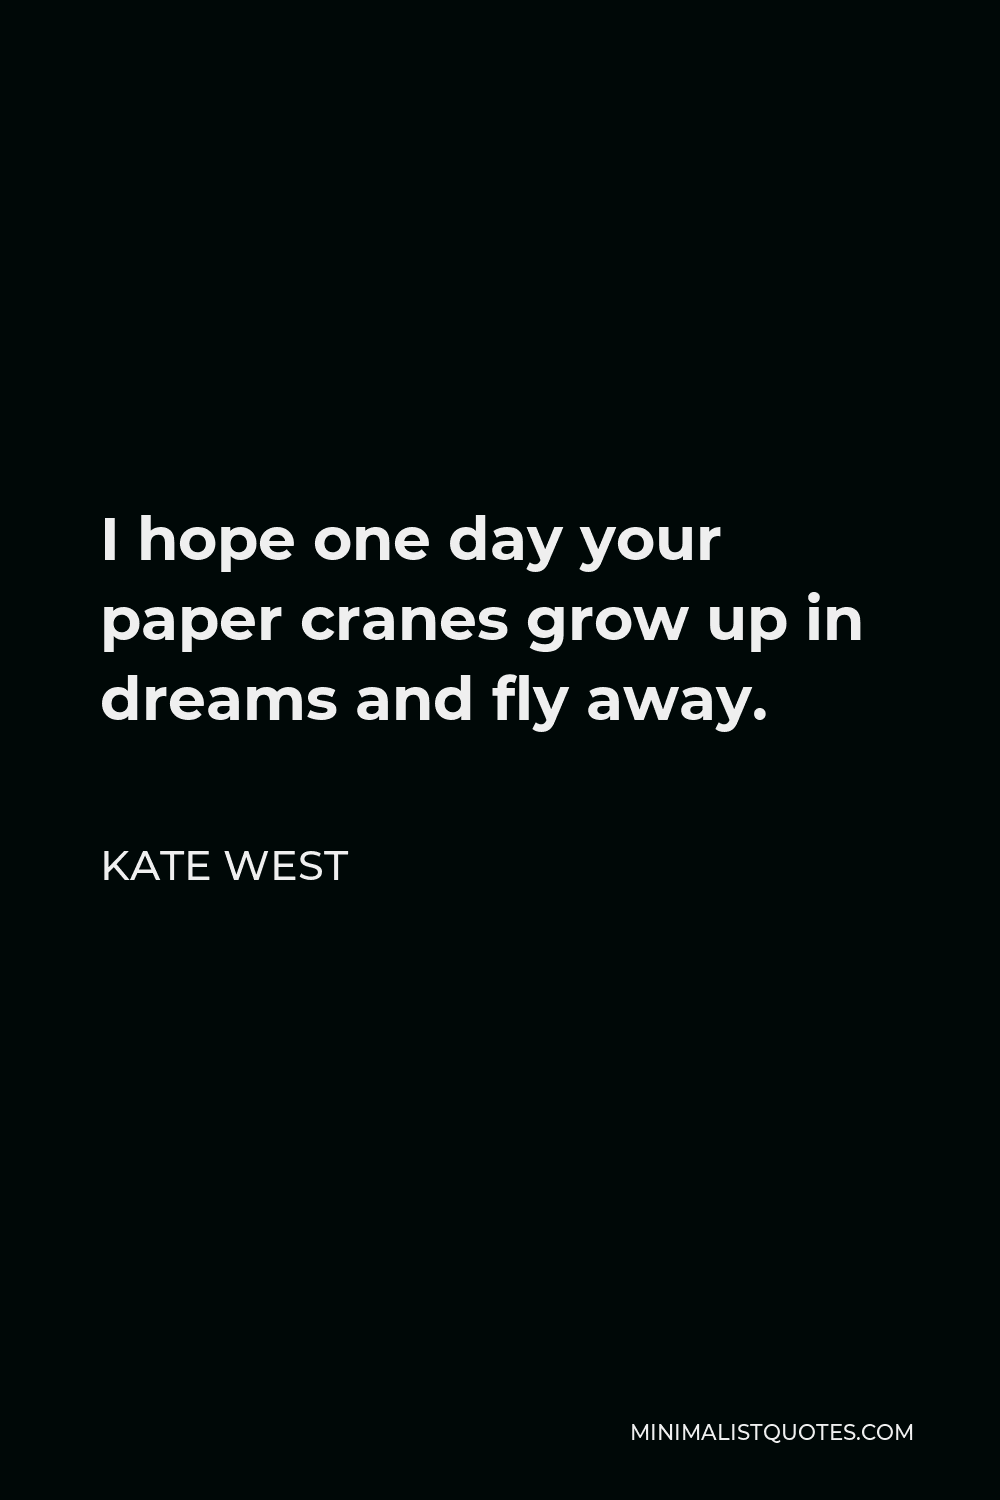 Kate West Quote - I hope one day your paper cranes grow up in dreams and fly away.